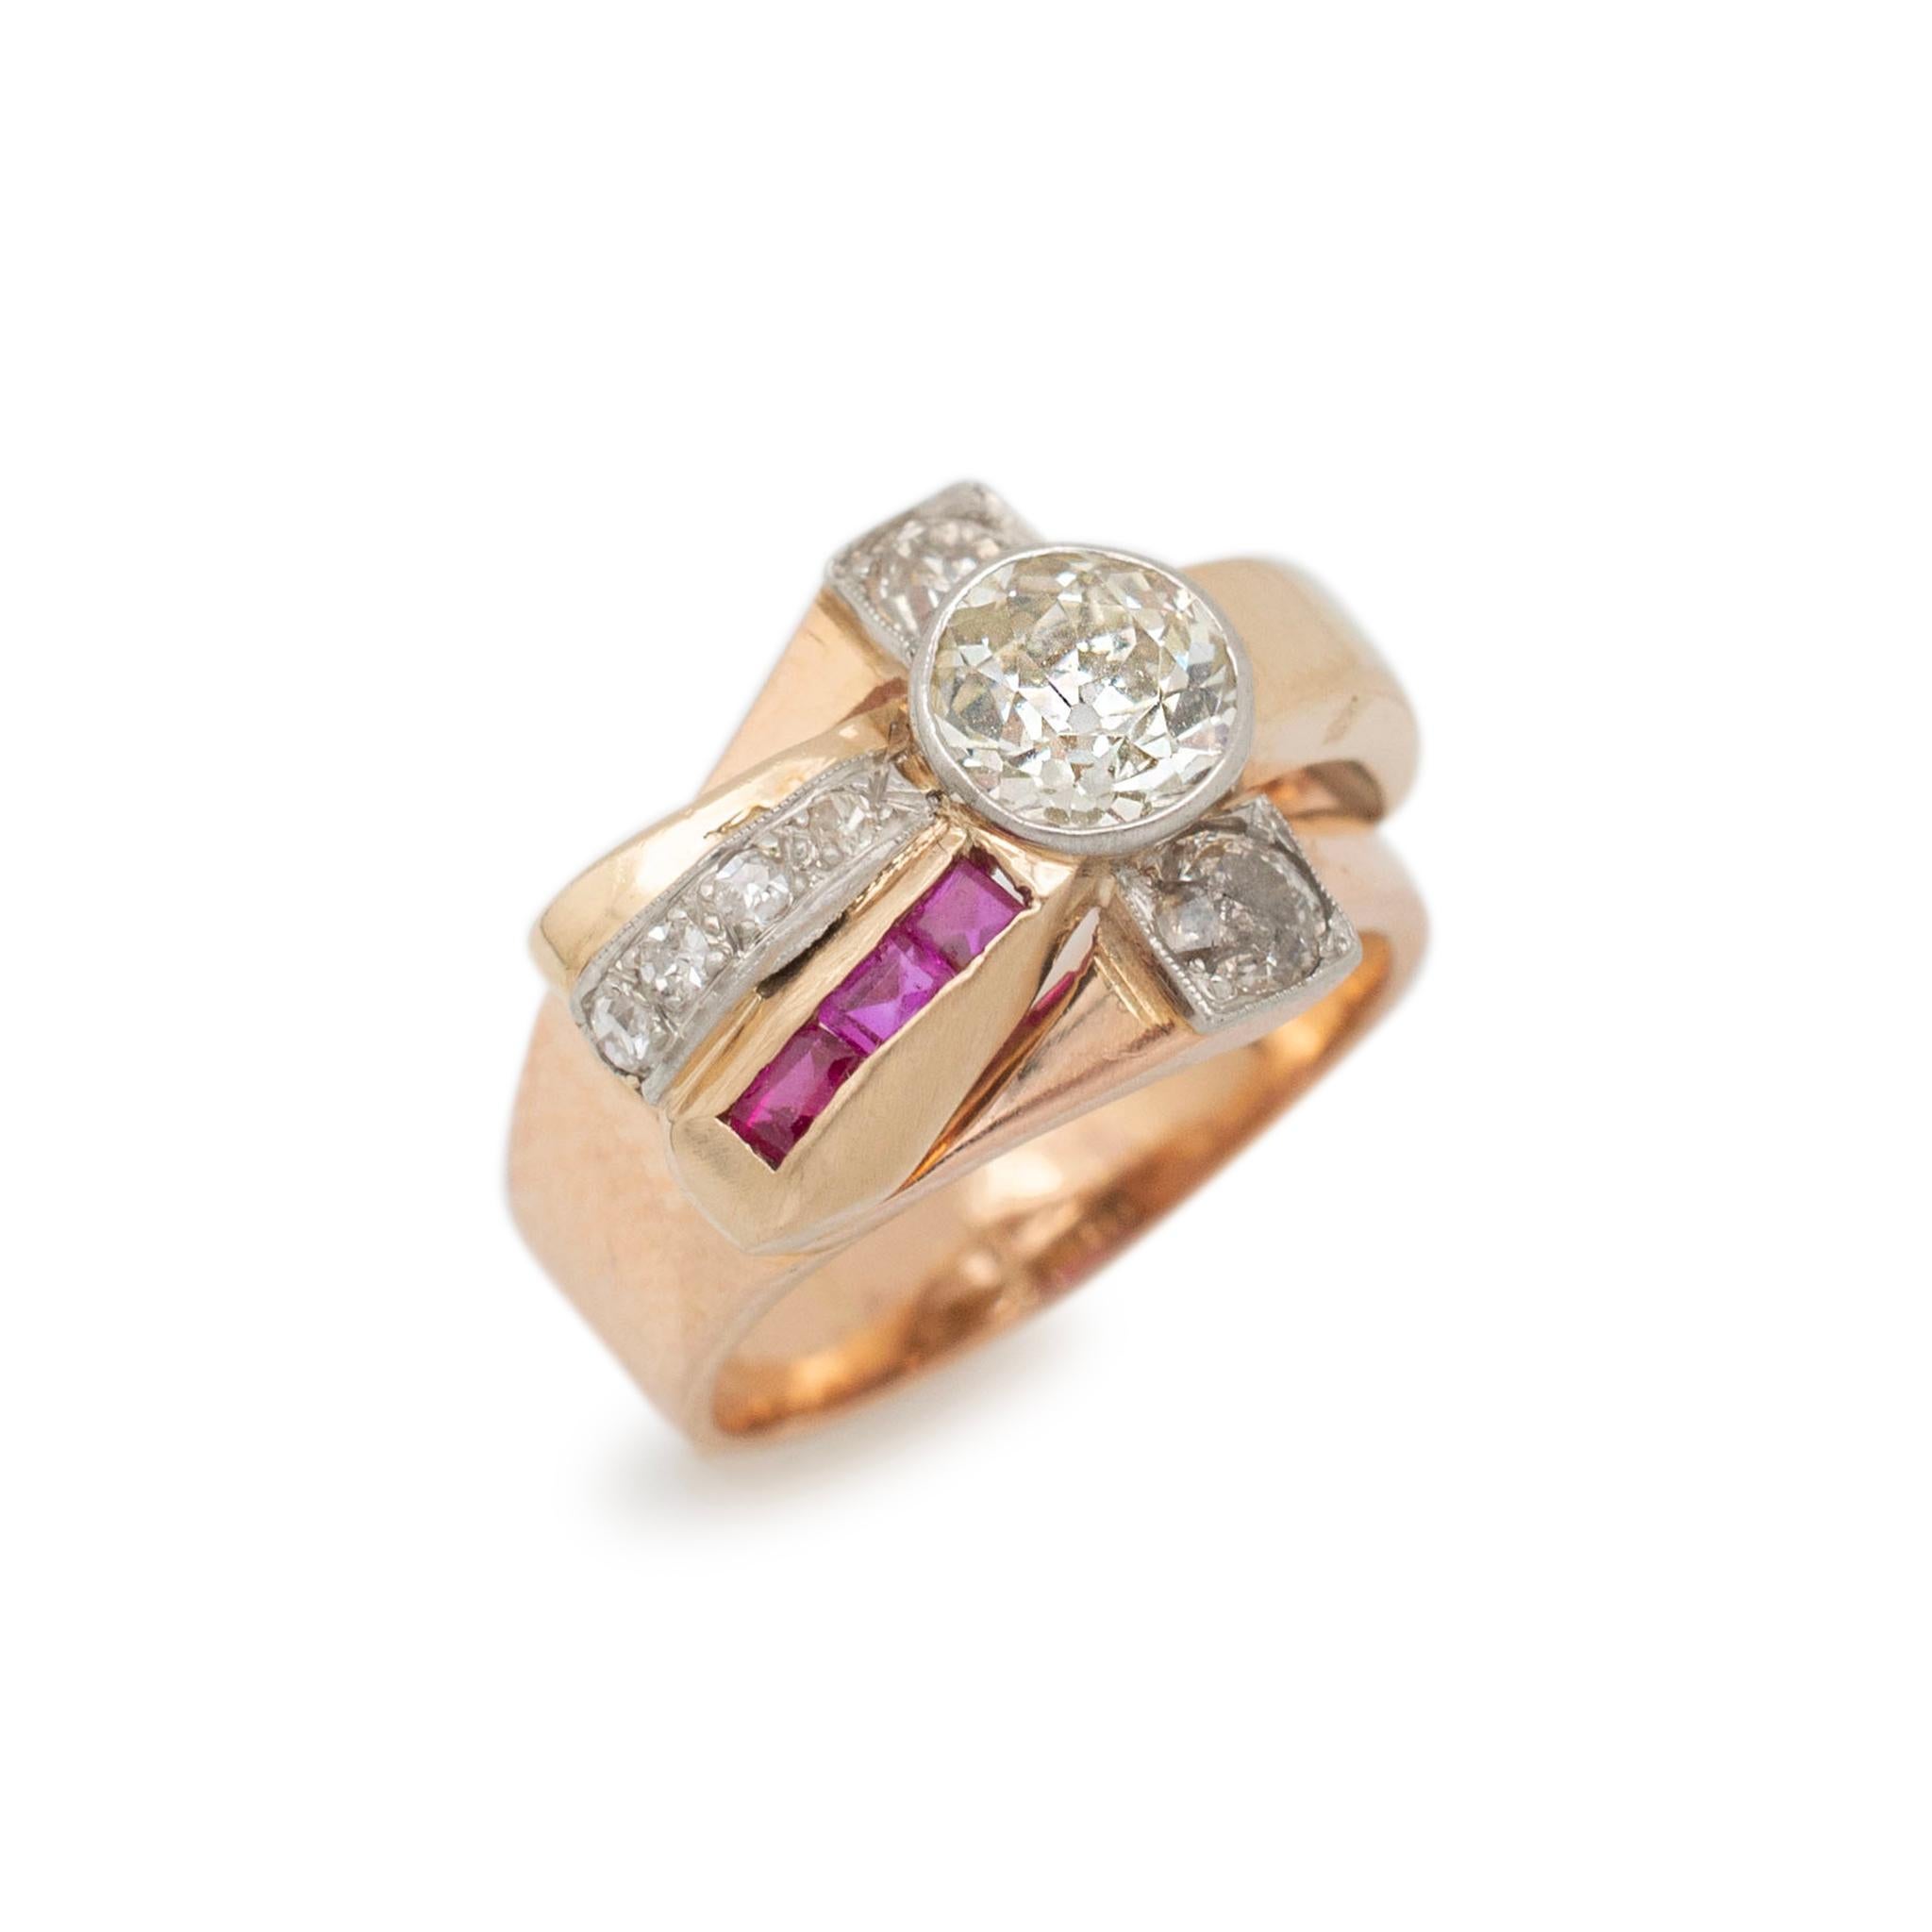 Gender: Ladies

Metal Type: Platinum & 14K Yellow Gold

Size: 4

Shank Maximum Width: 11.50 mm tapering to 4.35 mm

Weight: 4.80 grams

Ladies 14K yellow gold and platinum diamond and ruby vintage cocktail ring with a half round shank. The metals